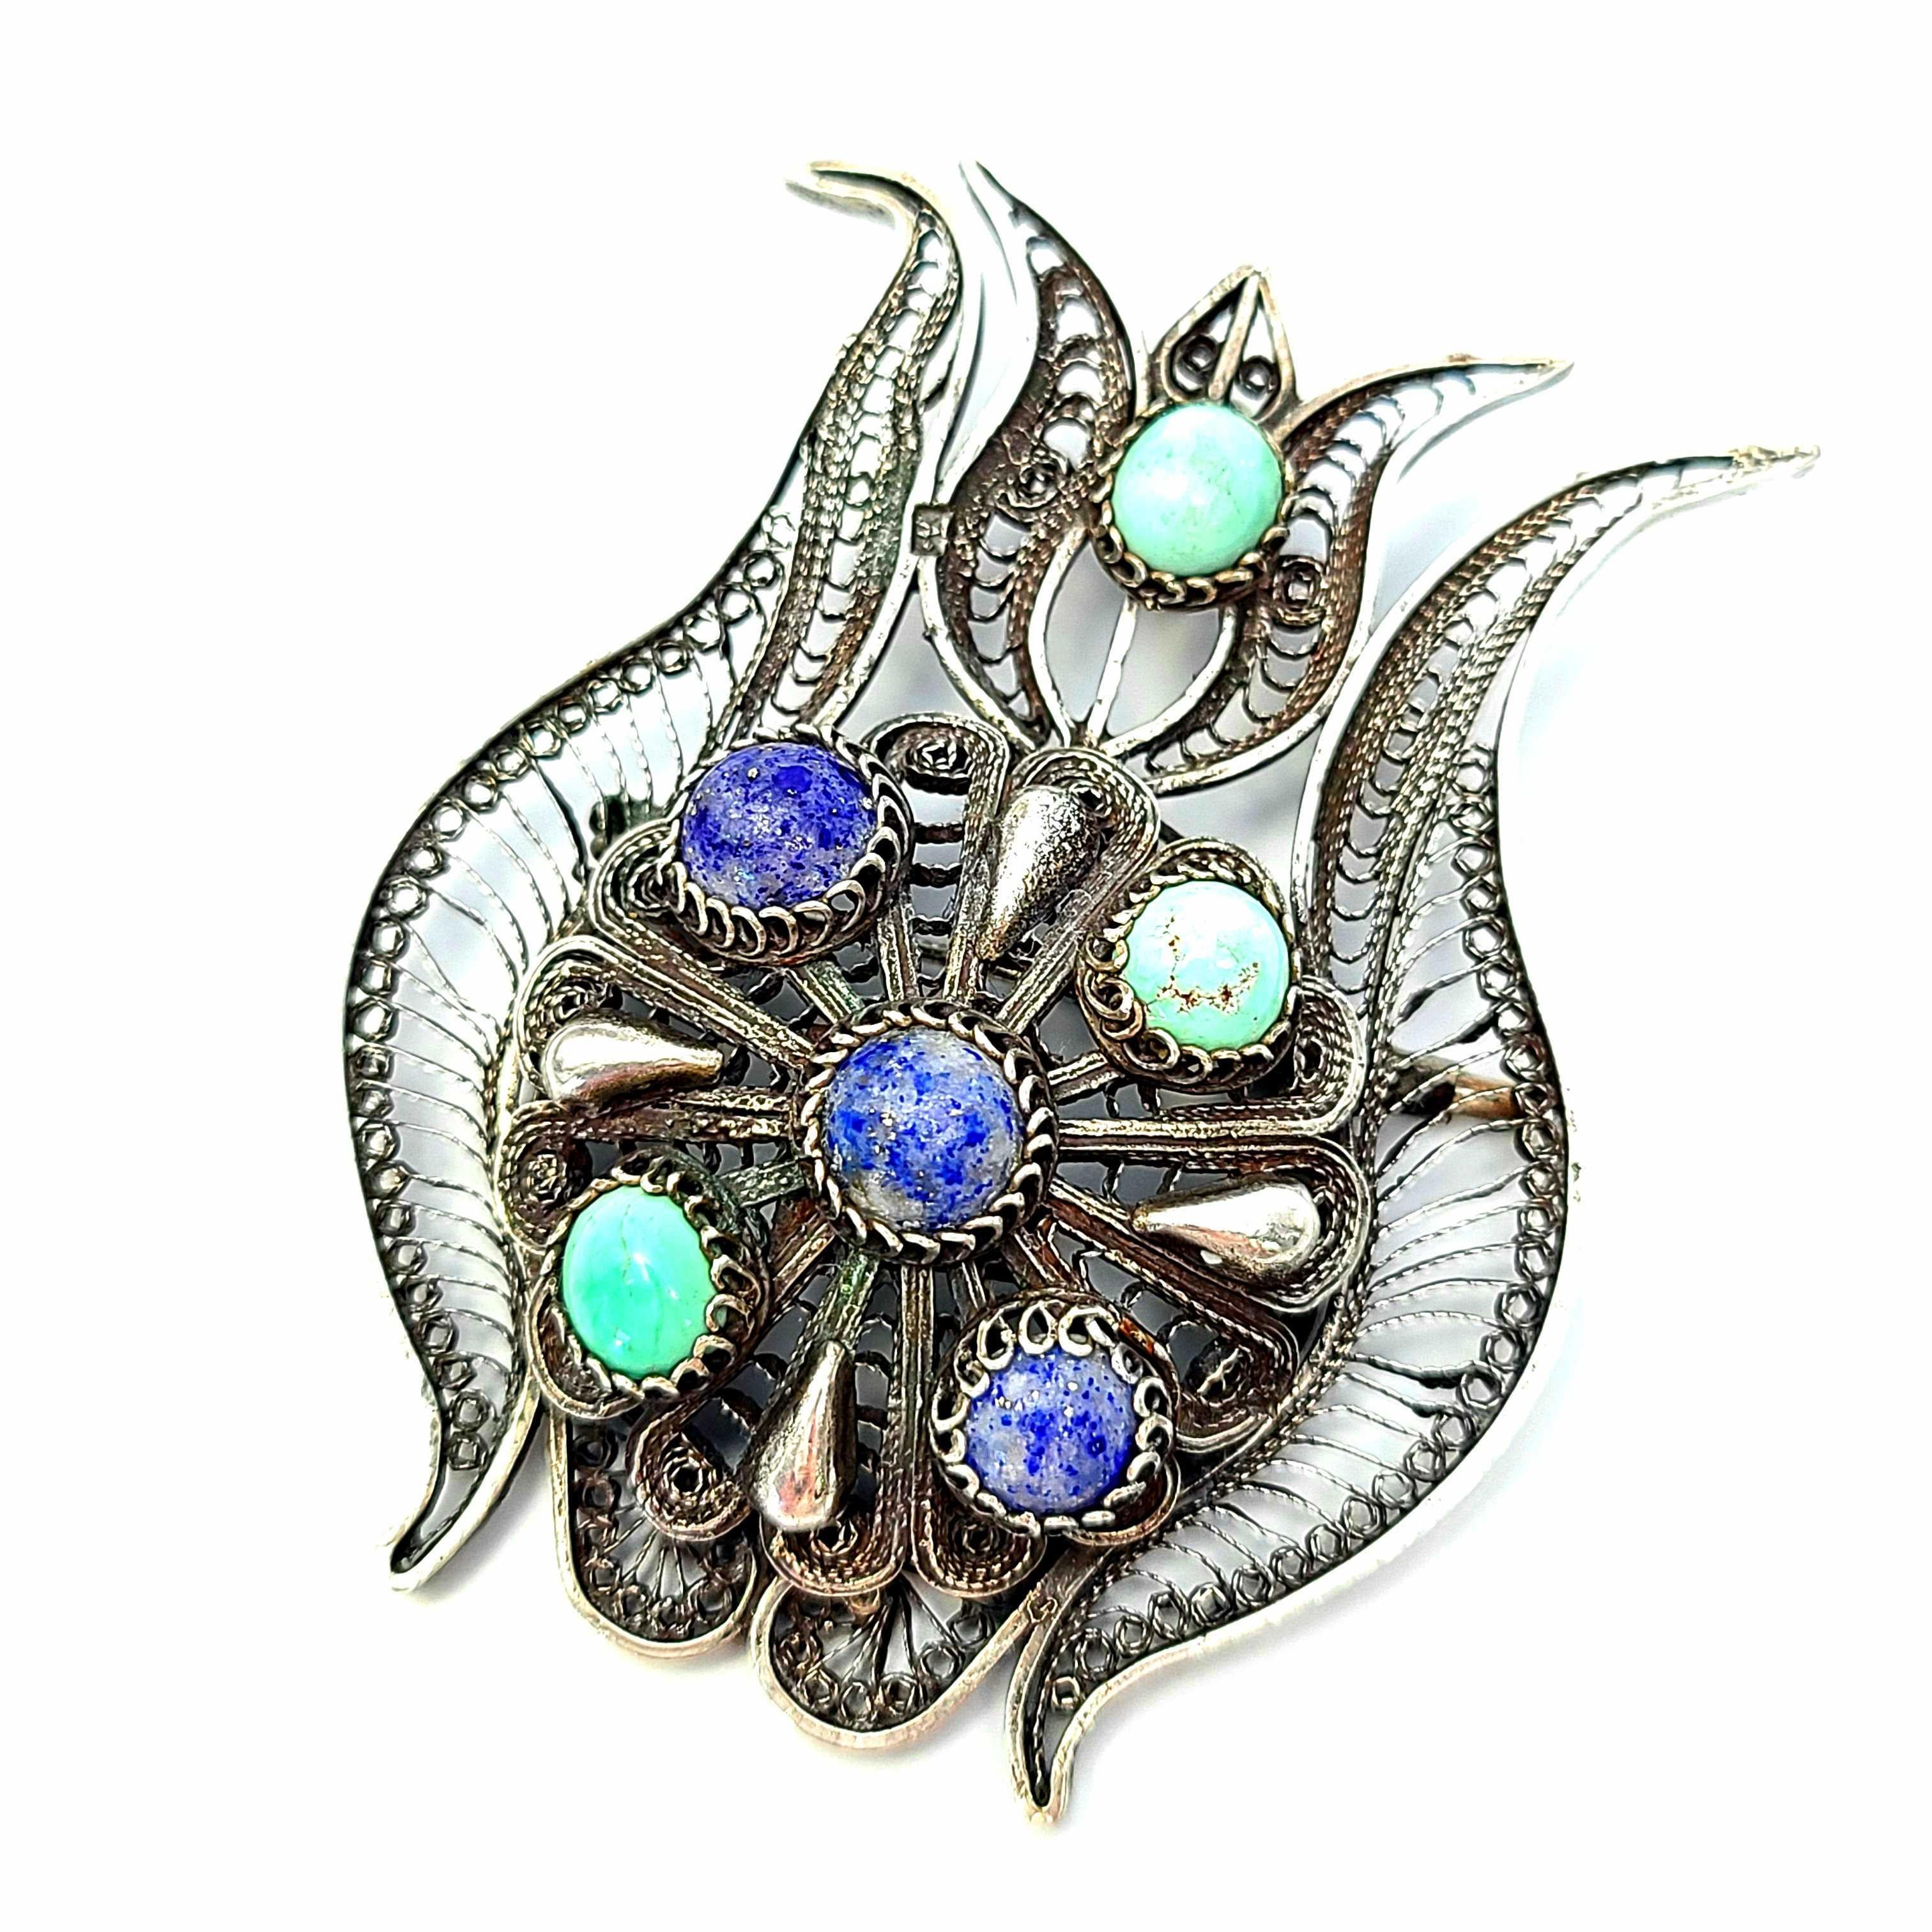 900 silver and blue stone Lotus flower pin/pendant.

This beautiful Egyptian silver lotus flower features blue stones that appear to be turquoise and lapis lazuli, and an intricate filigree design. It can be worn as a pin or a pendant.

Measures